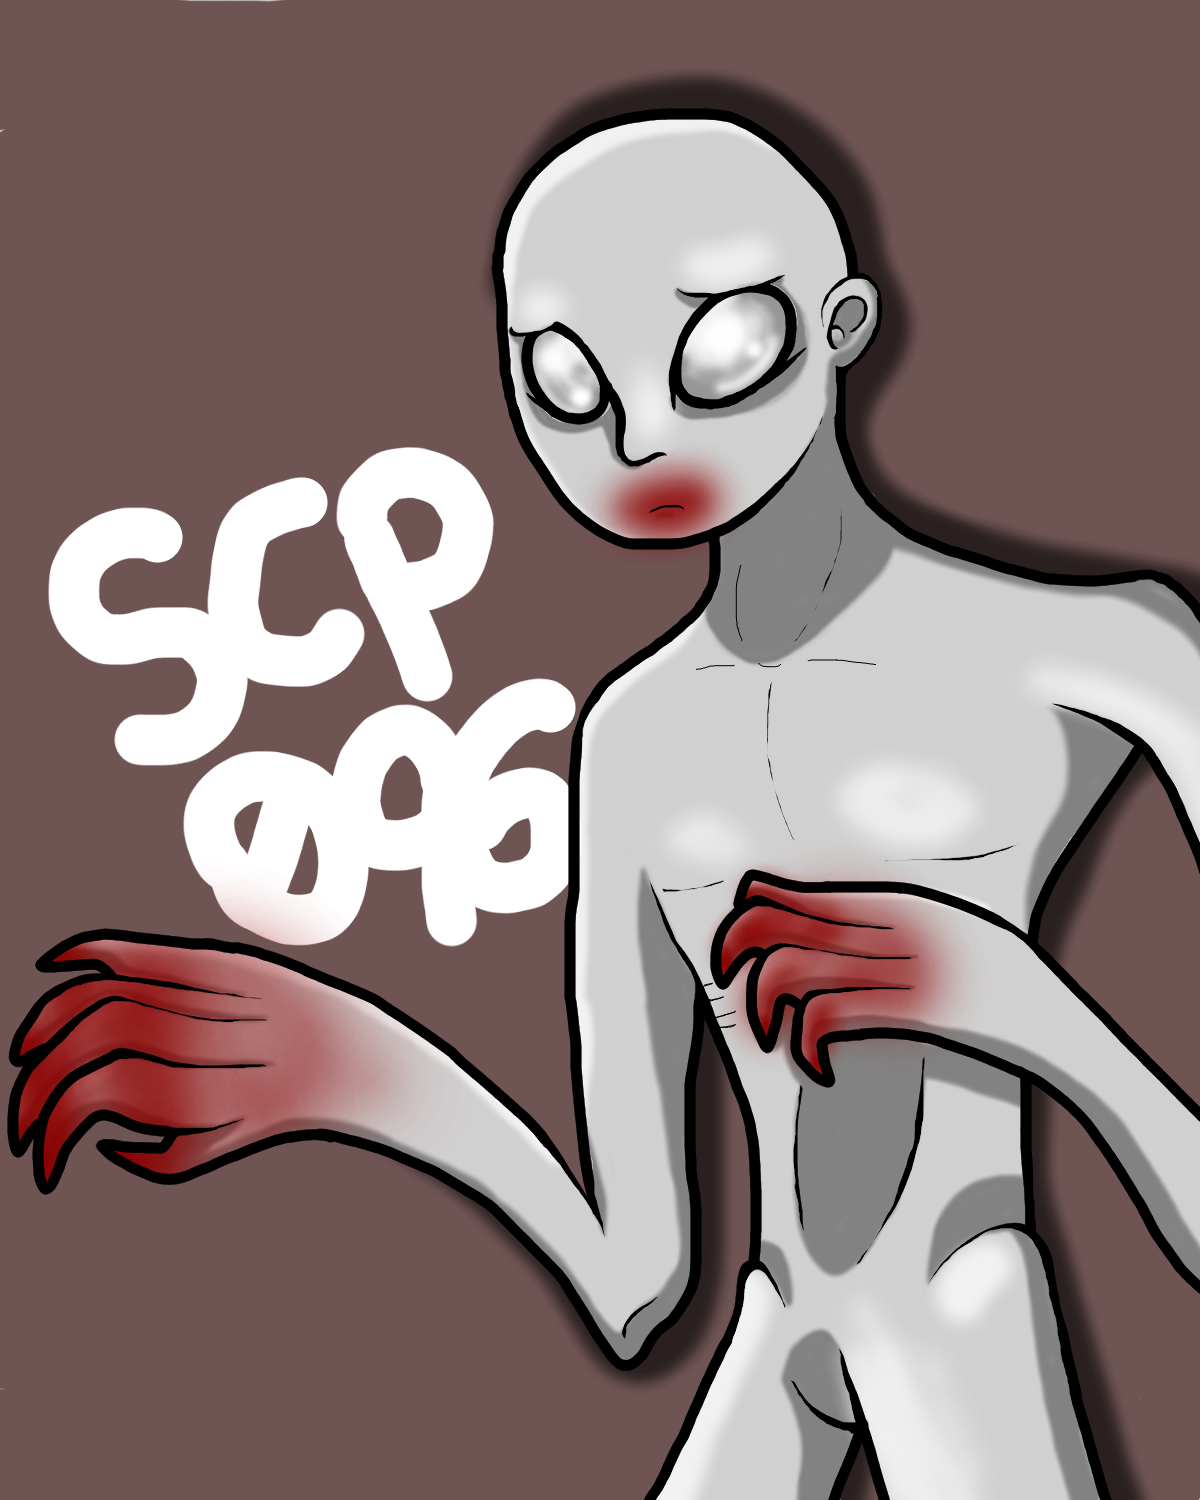 Scp 096 s